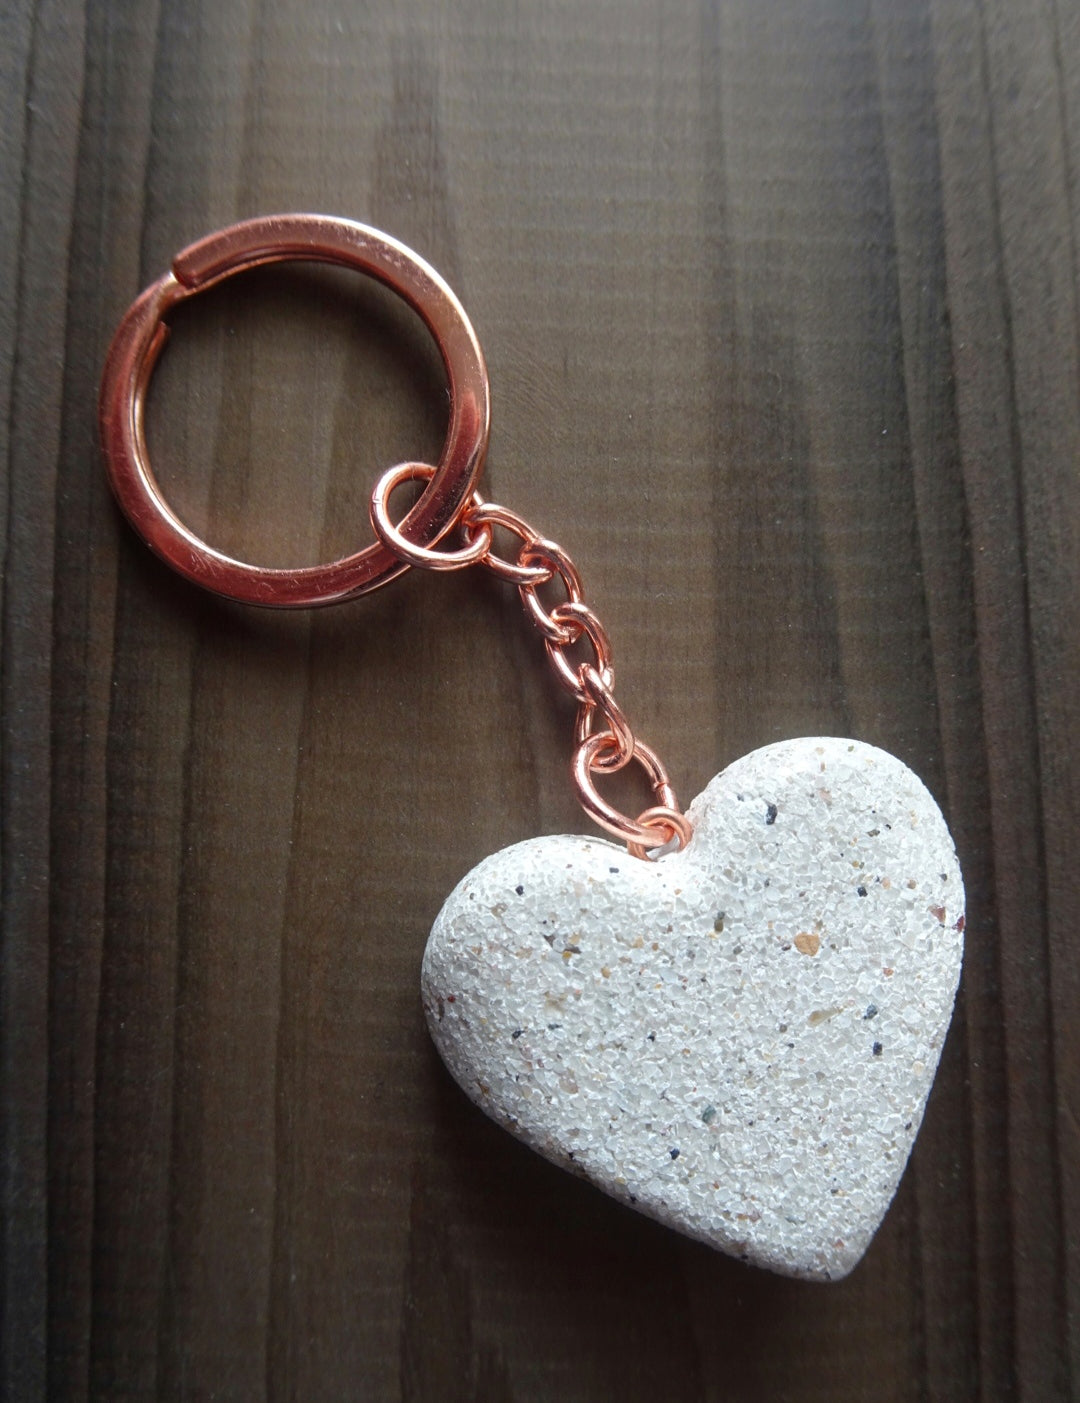 Chic Sparkling White Stone Heart Keychain with Rose Gold Hardware, Set Against a Dark Stained Wooden Background - Luxurious Accessory